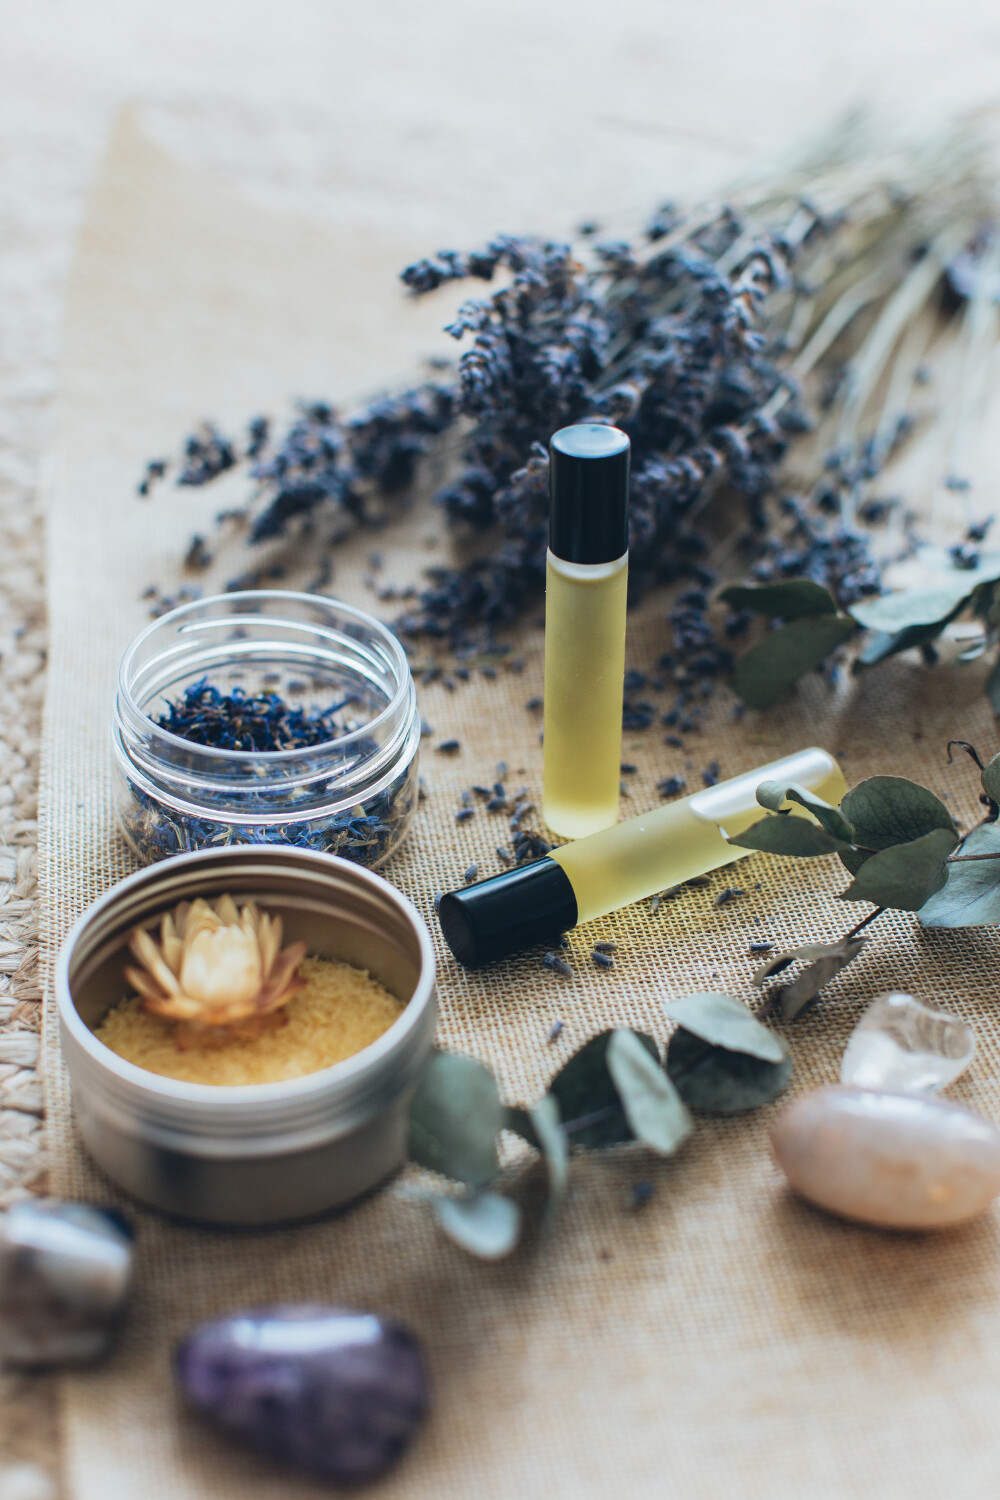 10 Ways to Use Lavender Essential Oil